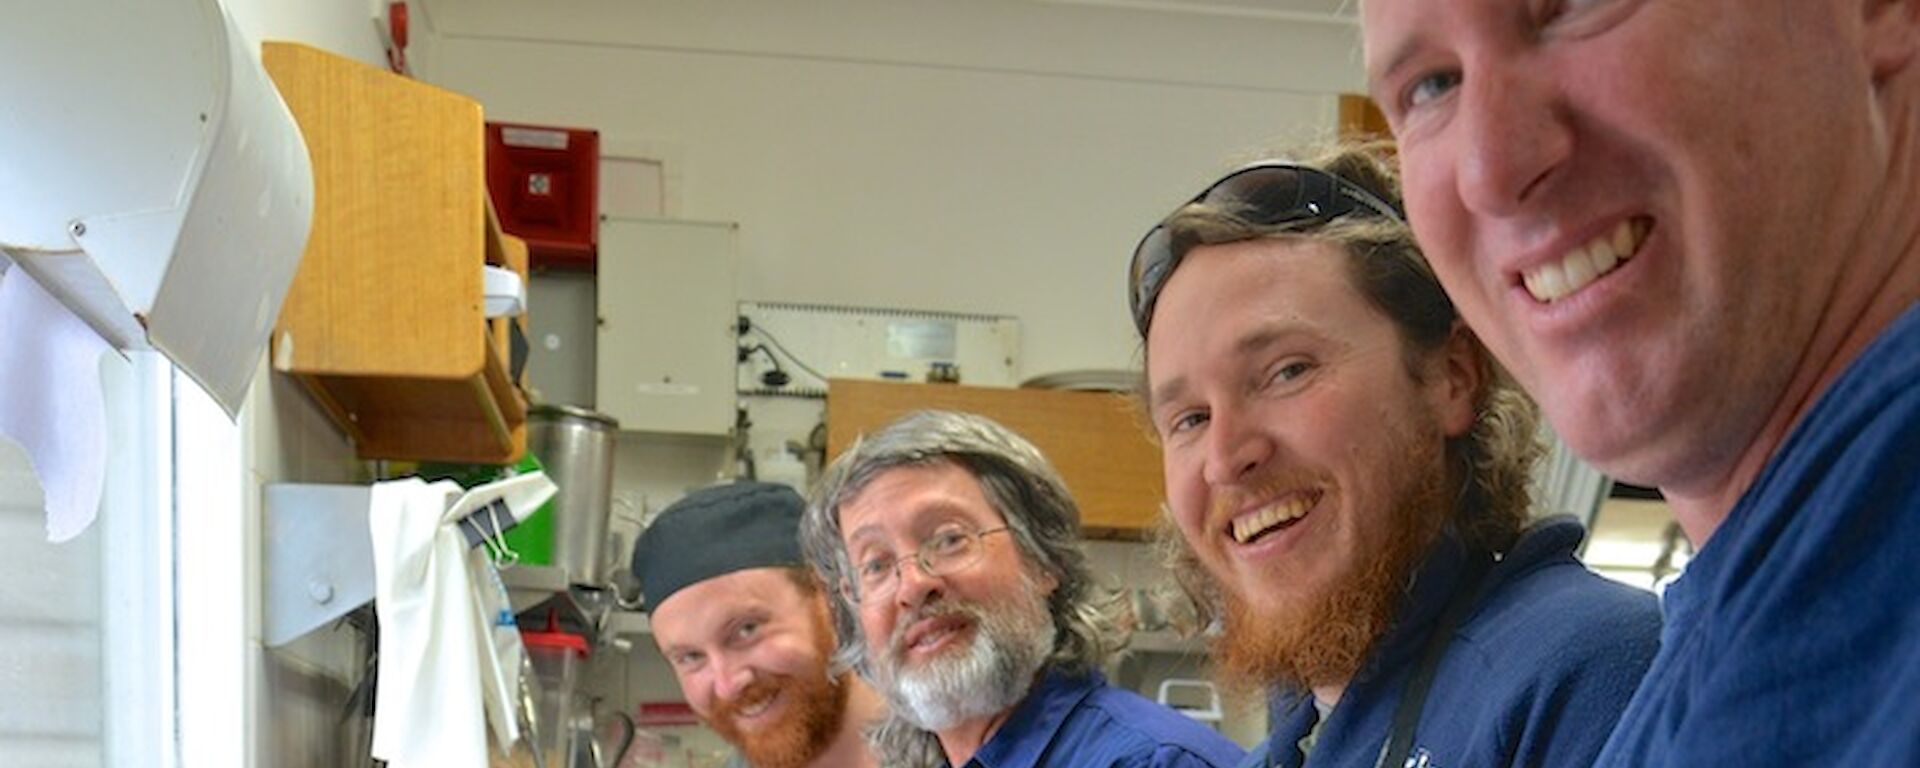 Four expeditioners: Jimmy, Clive, Aaron and Goldie standing by the kitchen sink peeling prawns for Christmas